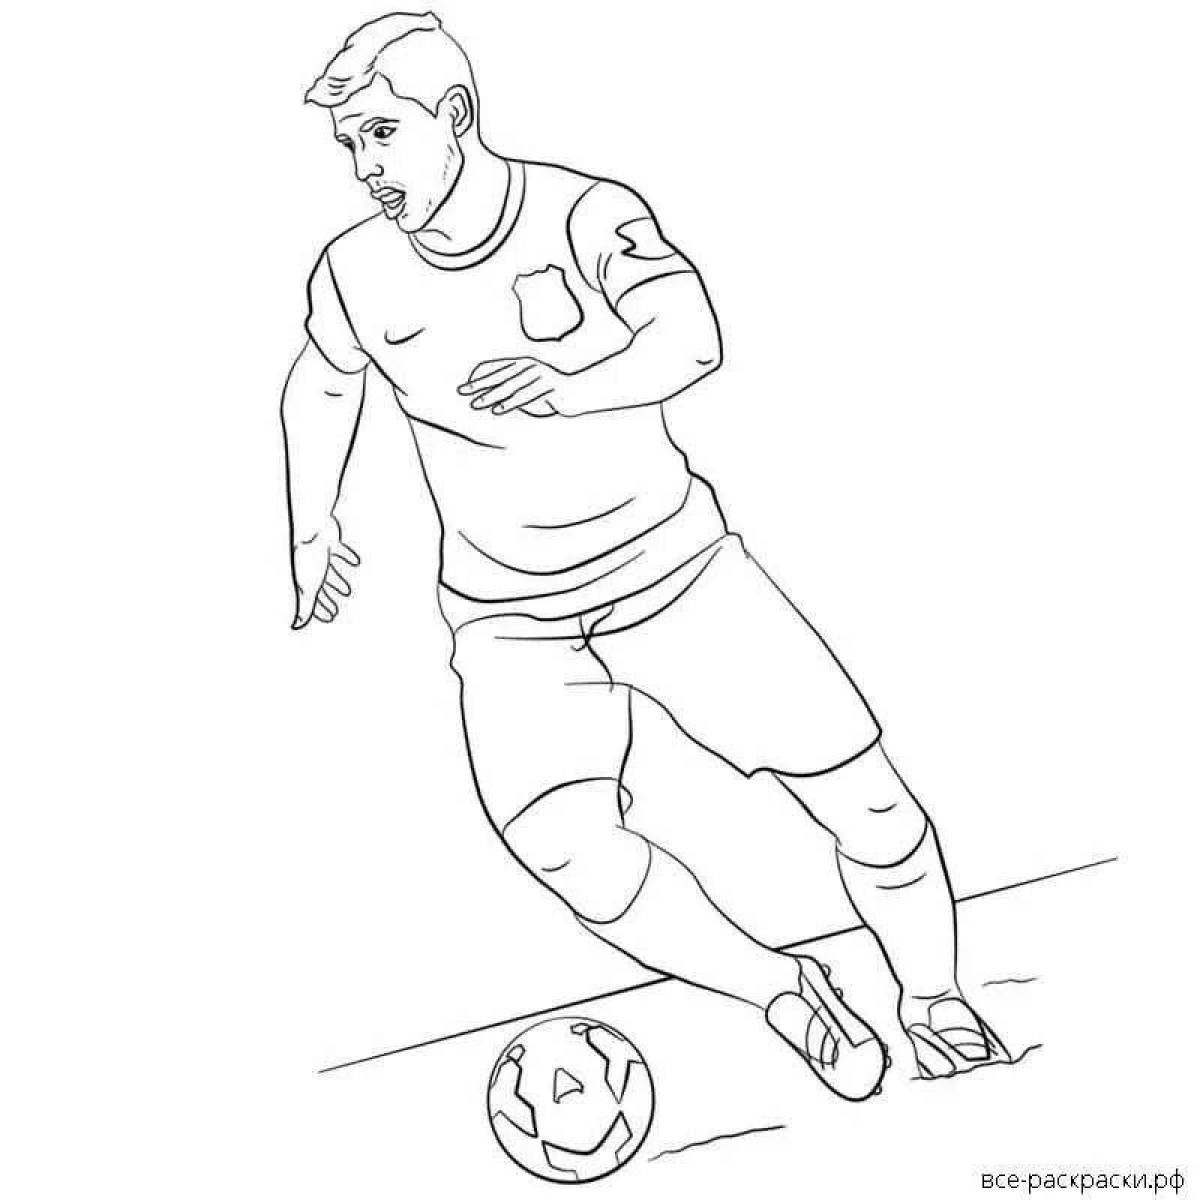 Bright soccer player with ball